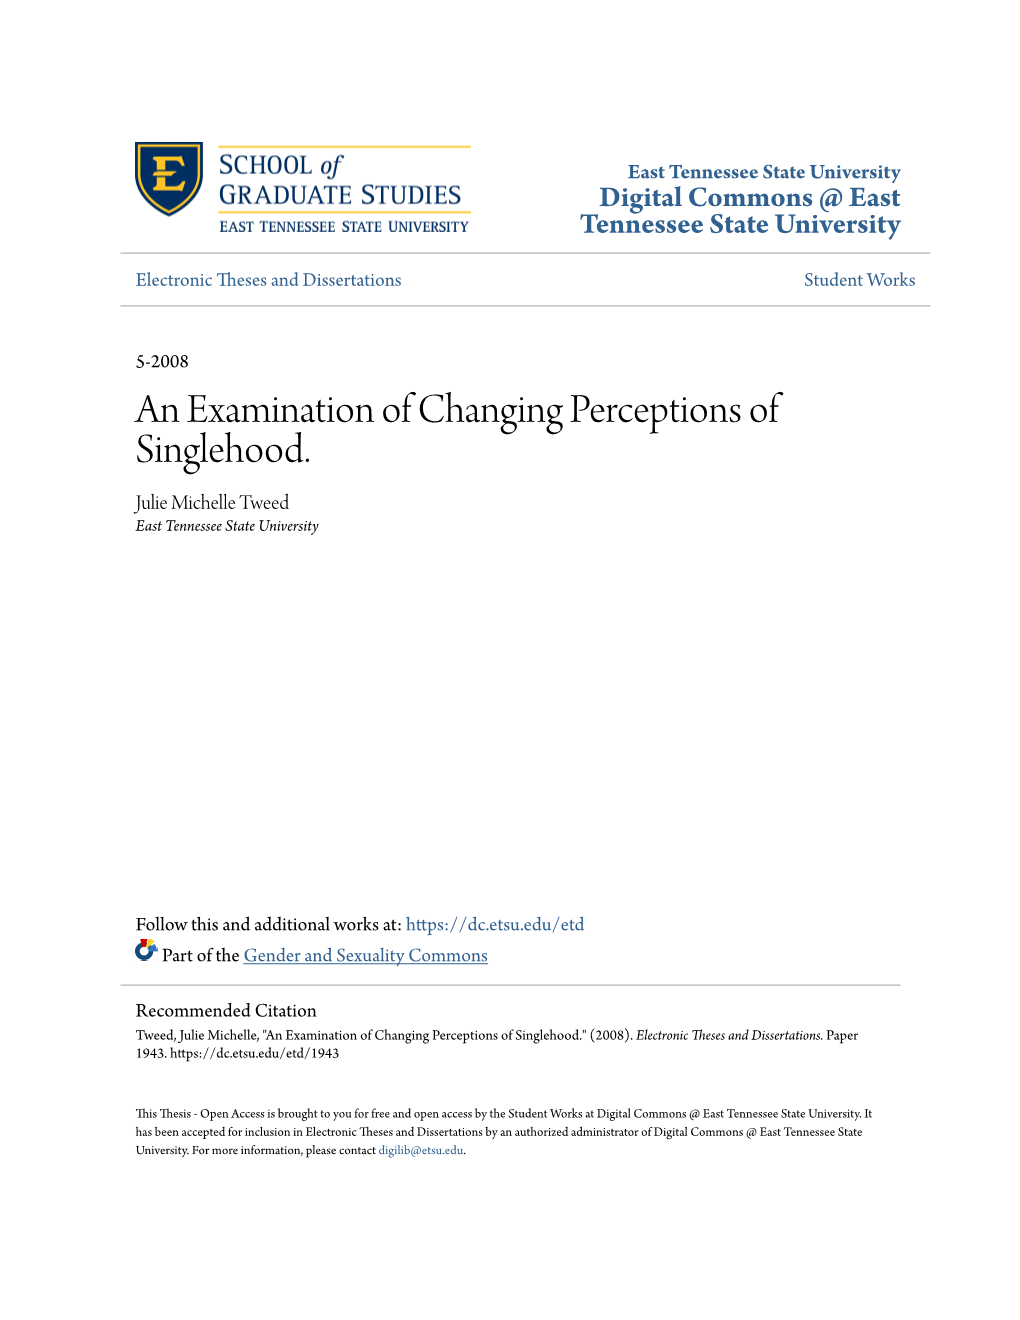 An Examination of Changing Perceptions of Singlehood. Julie Michelle Tweed East Tennessee State University